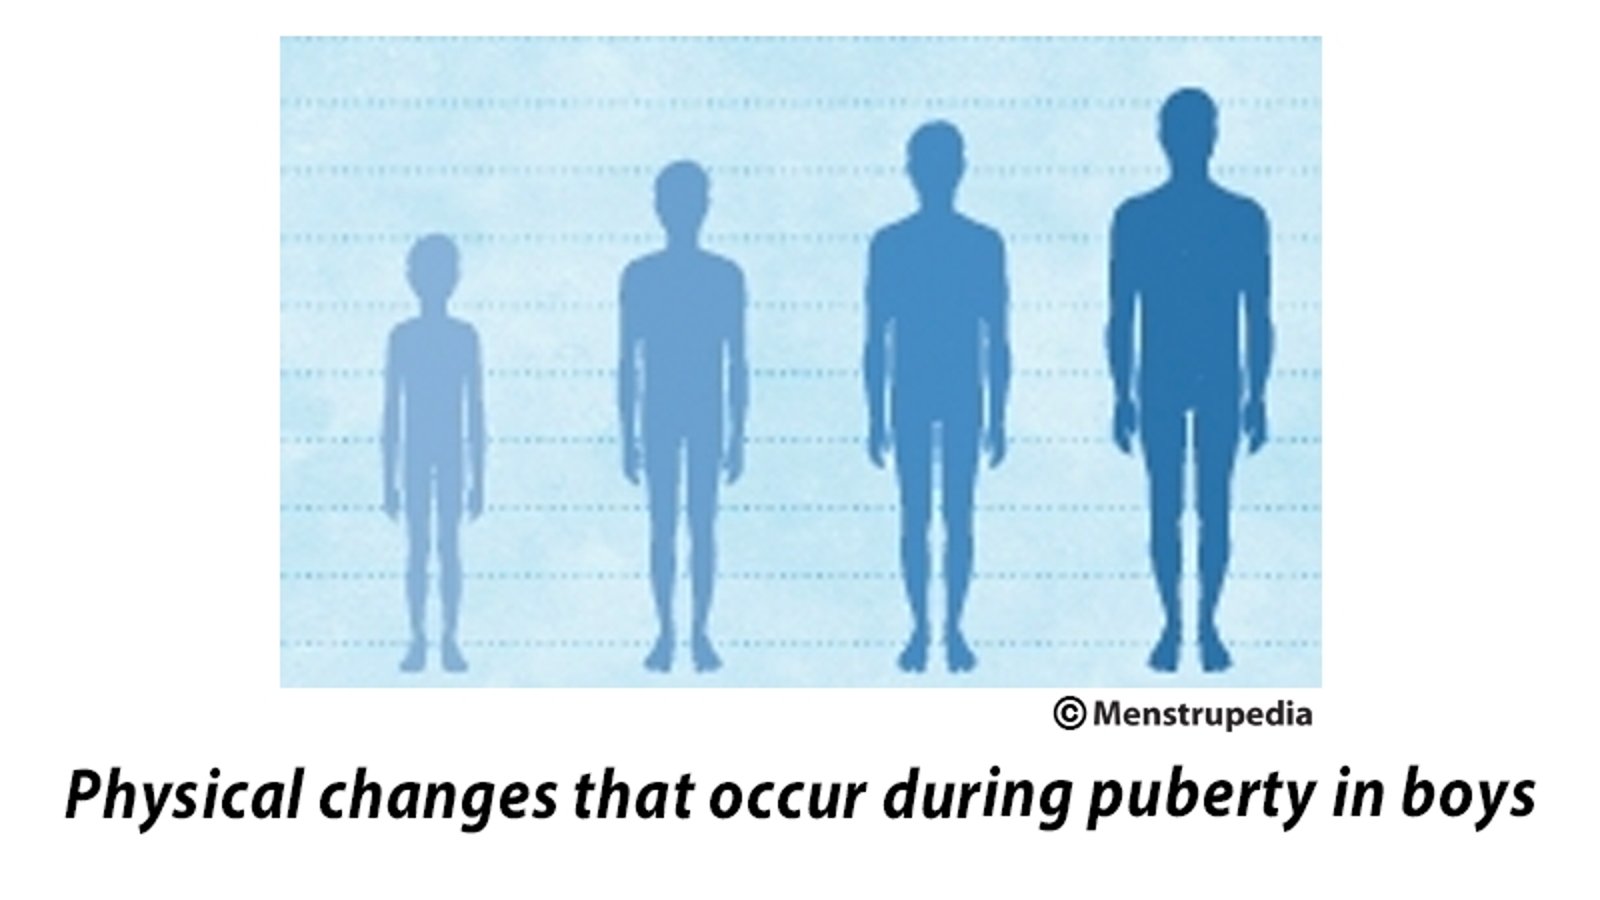 Physical changes that occur during puberty in girls